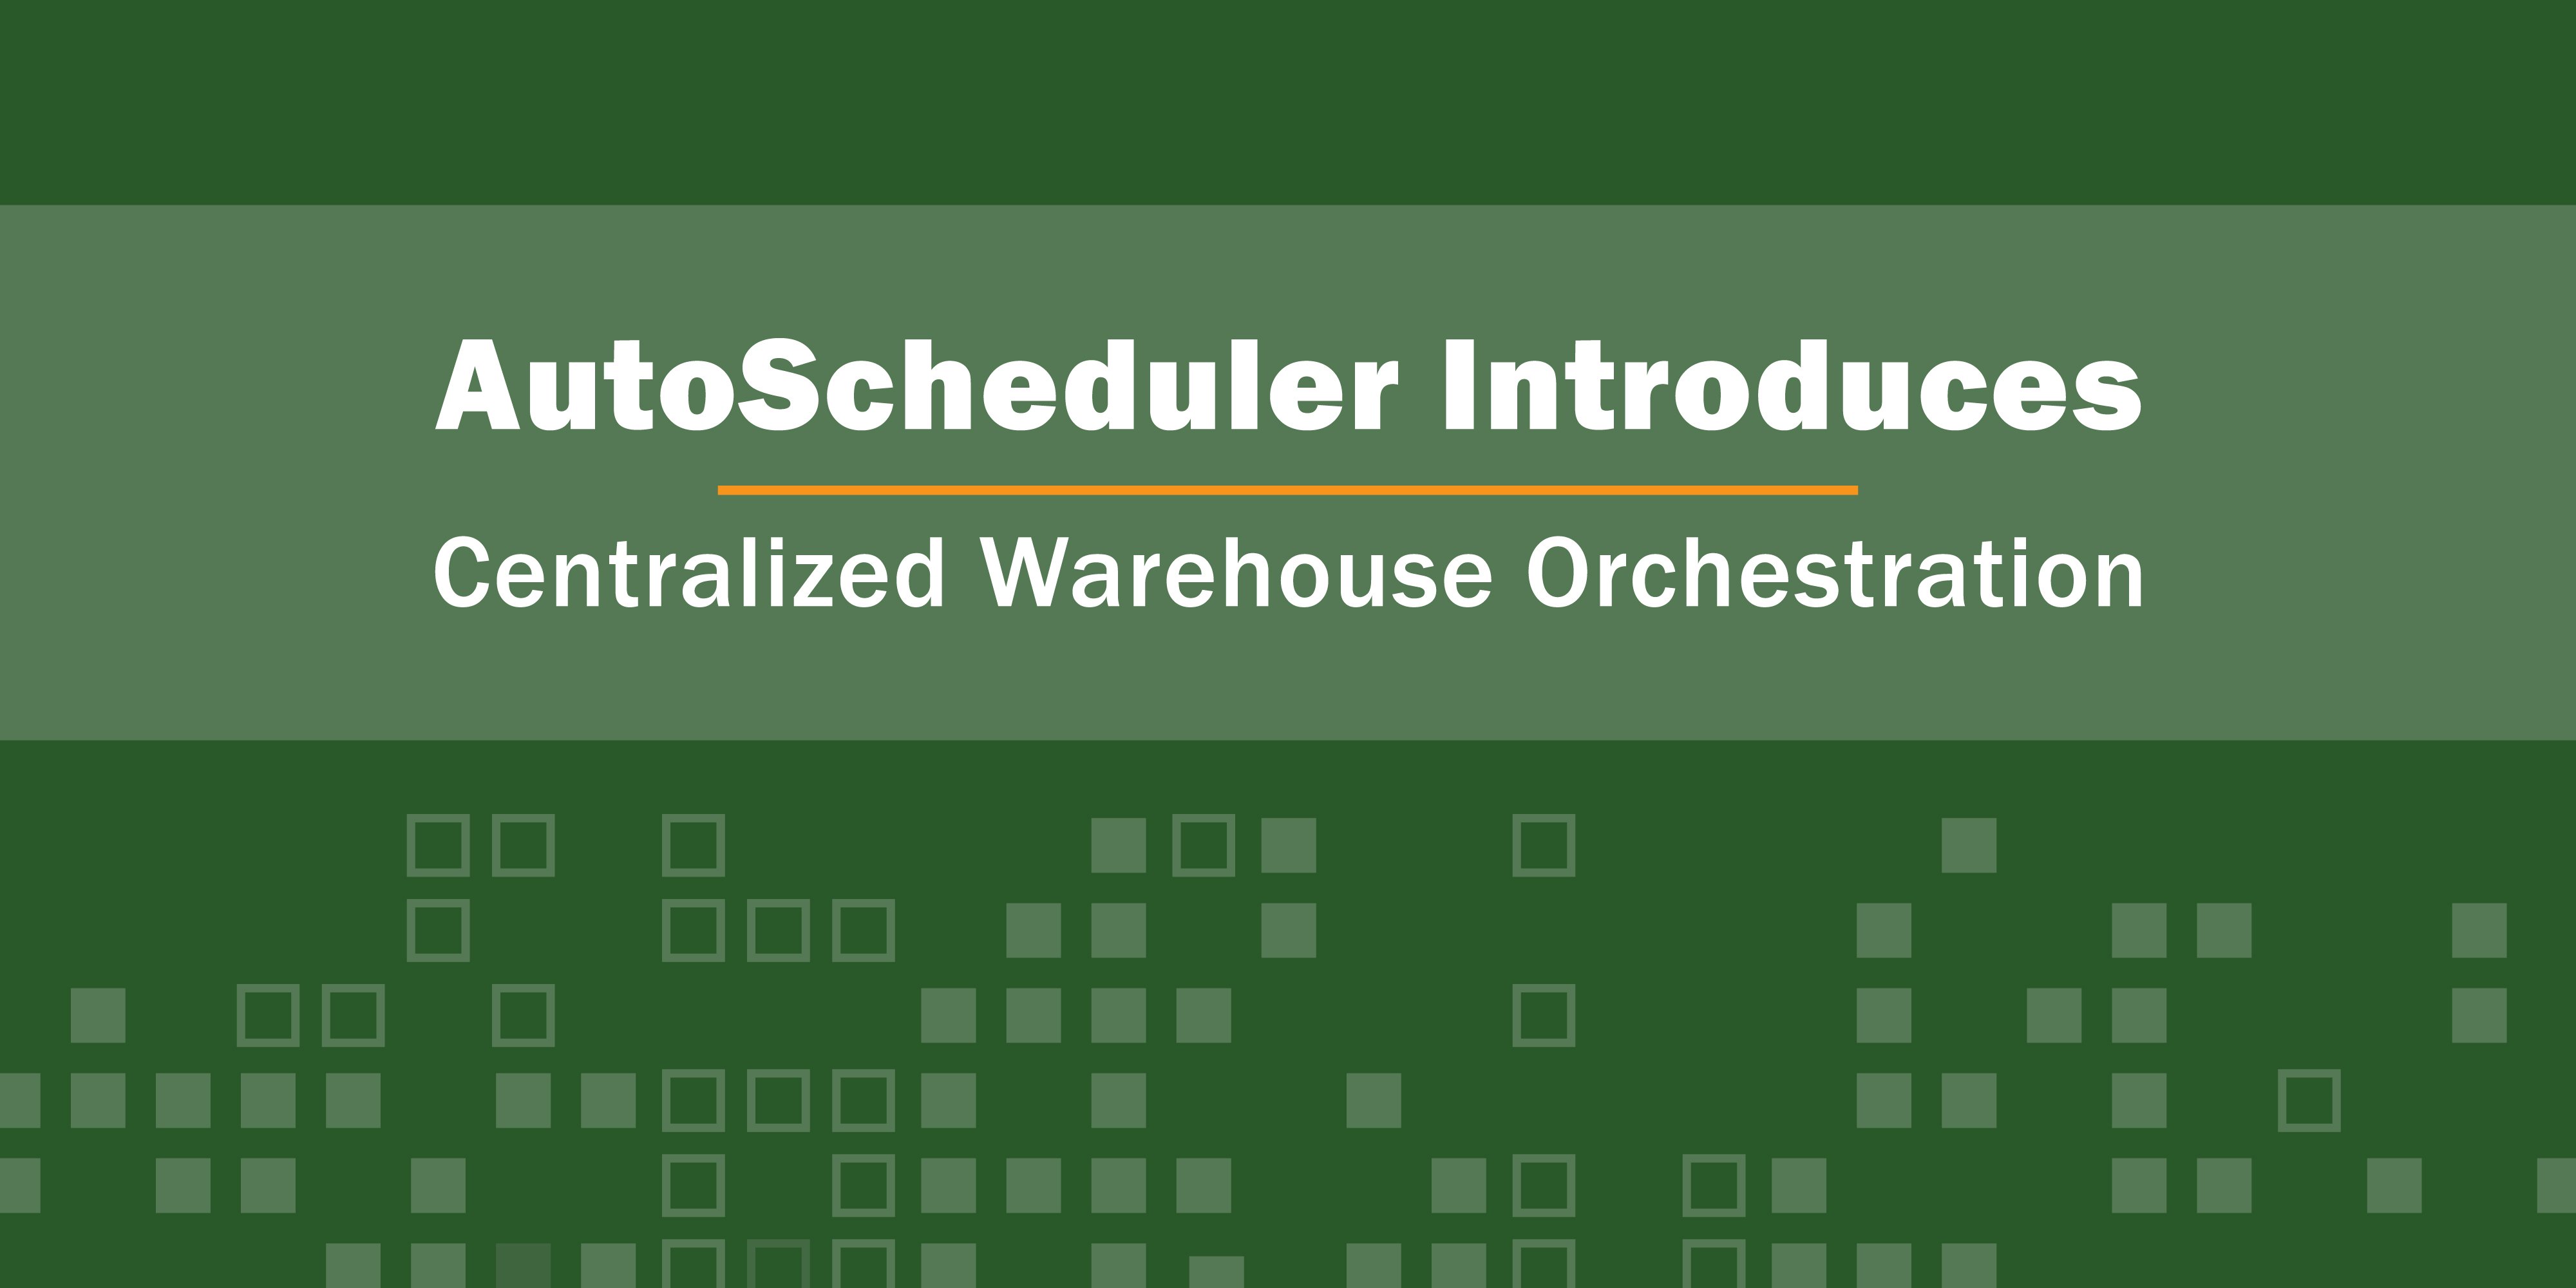 AutoScheduler Introduces Centralized Warehouse Orchestration